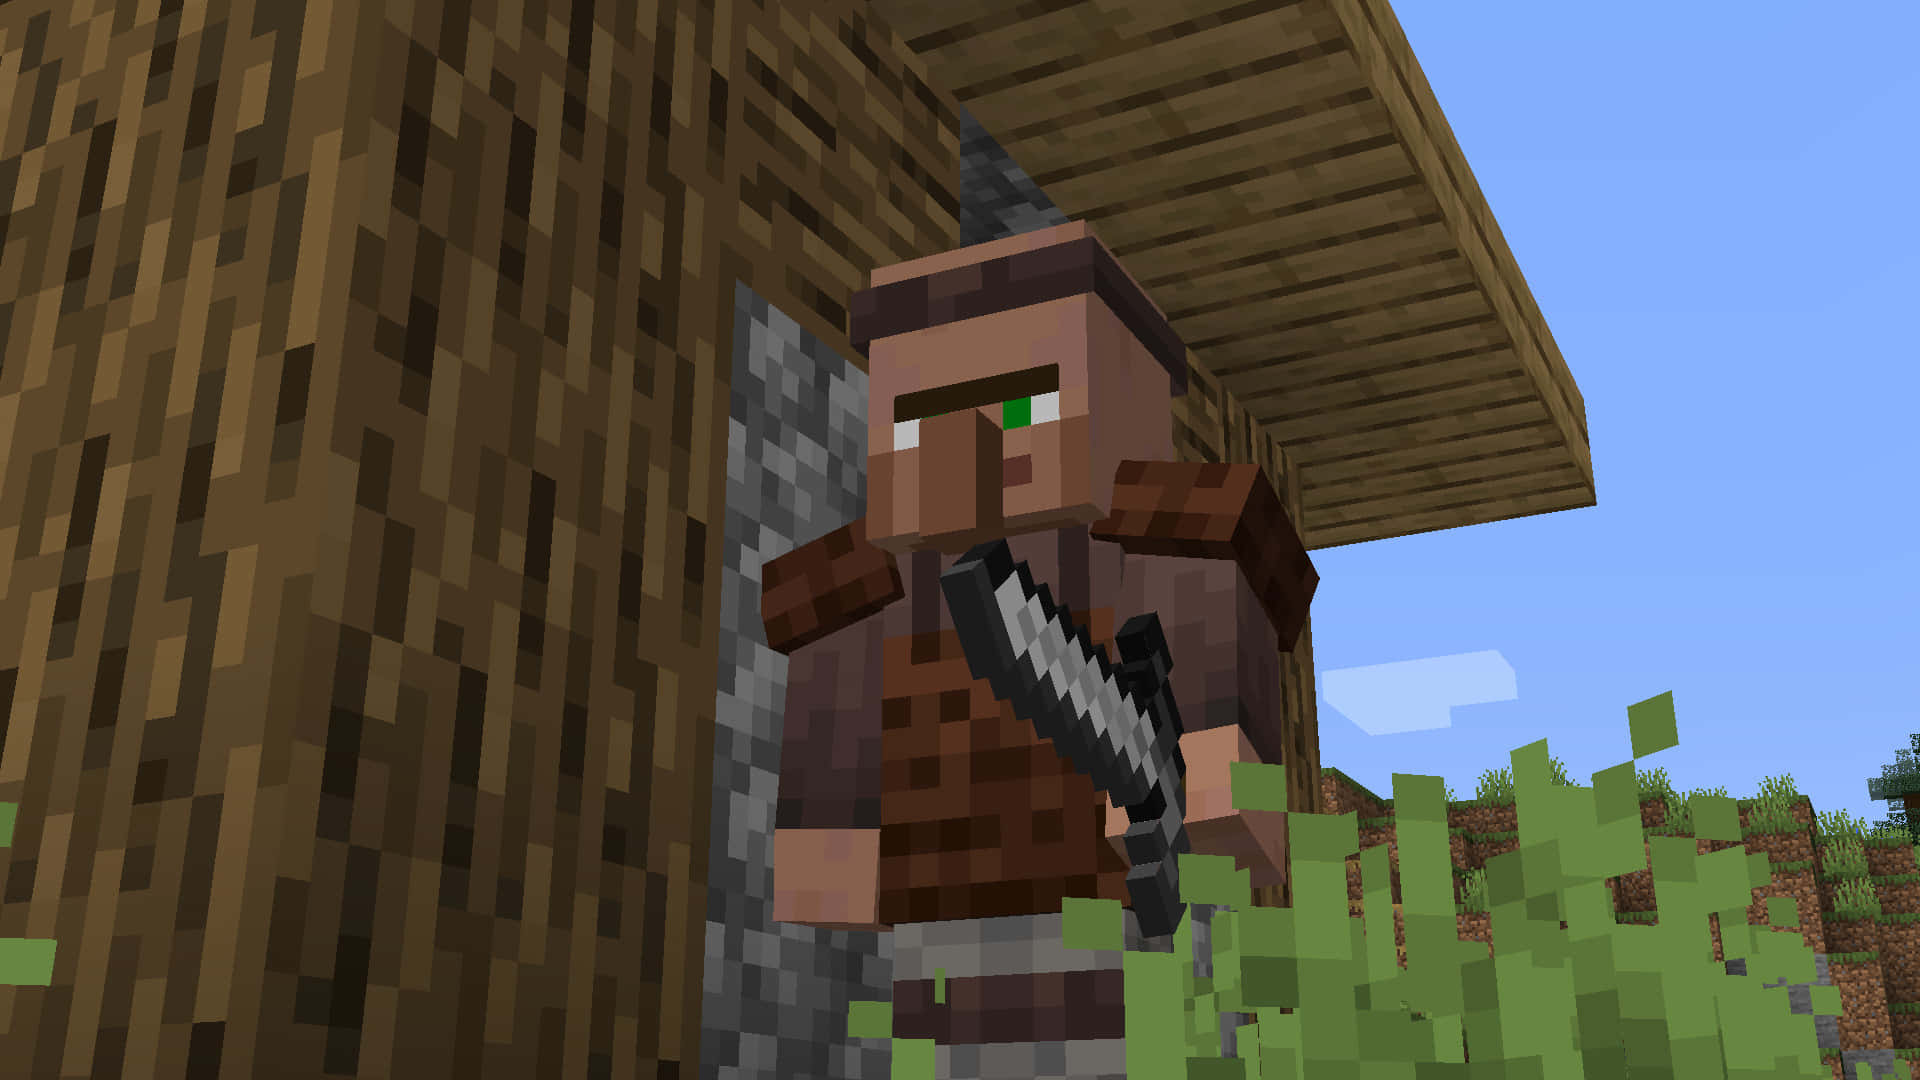 Friendly Minecraft Villager offers a trade in a scenic village Wallpaper